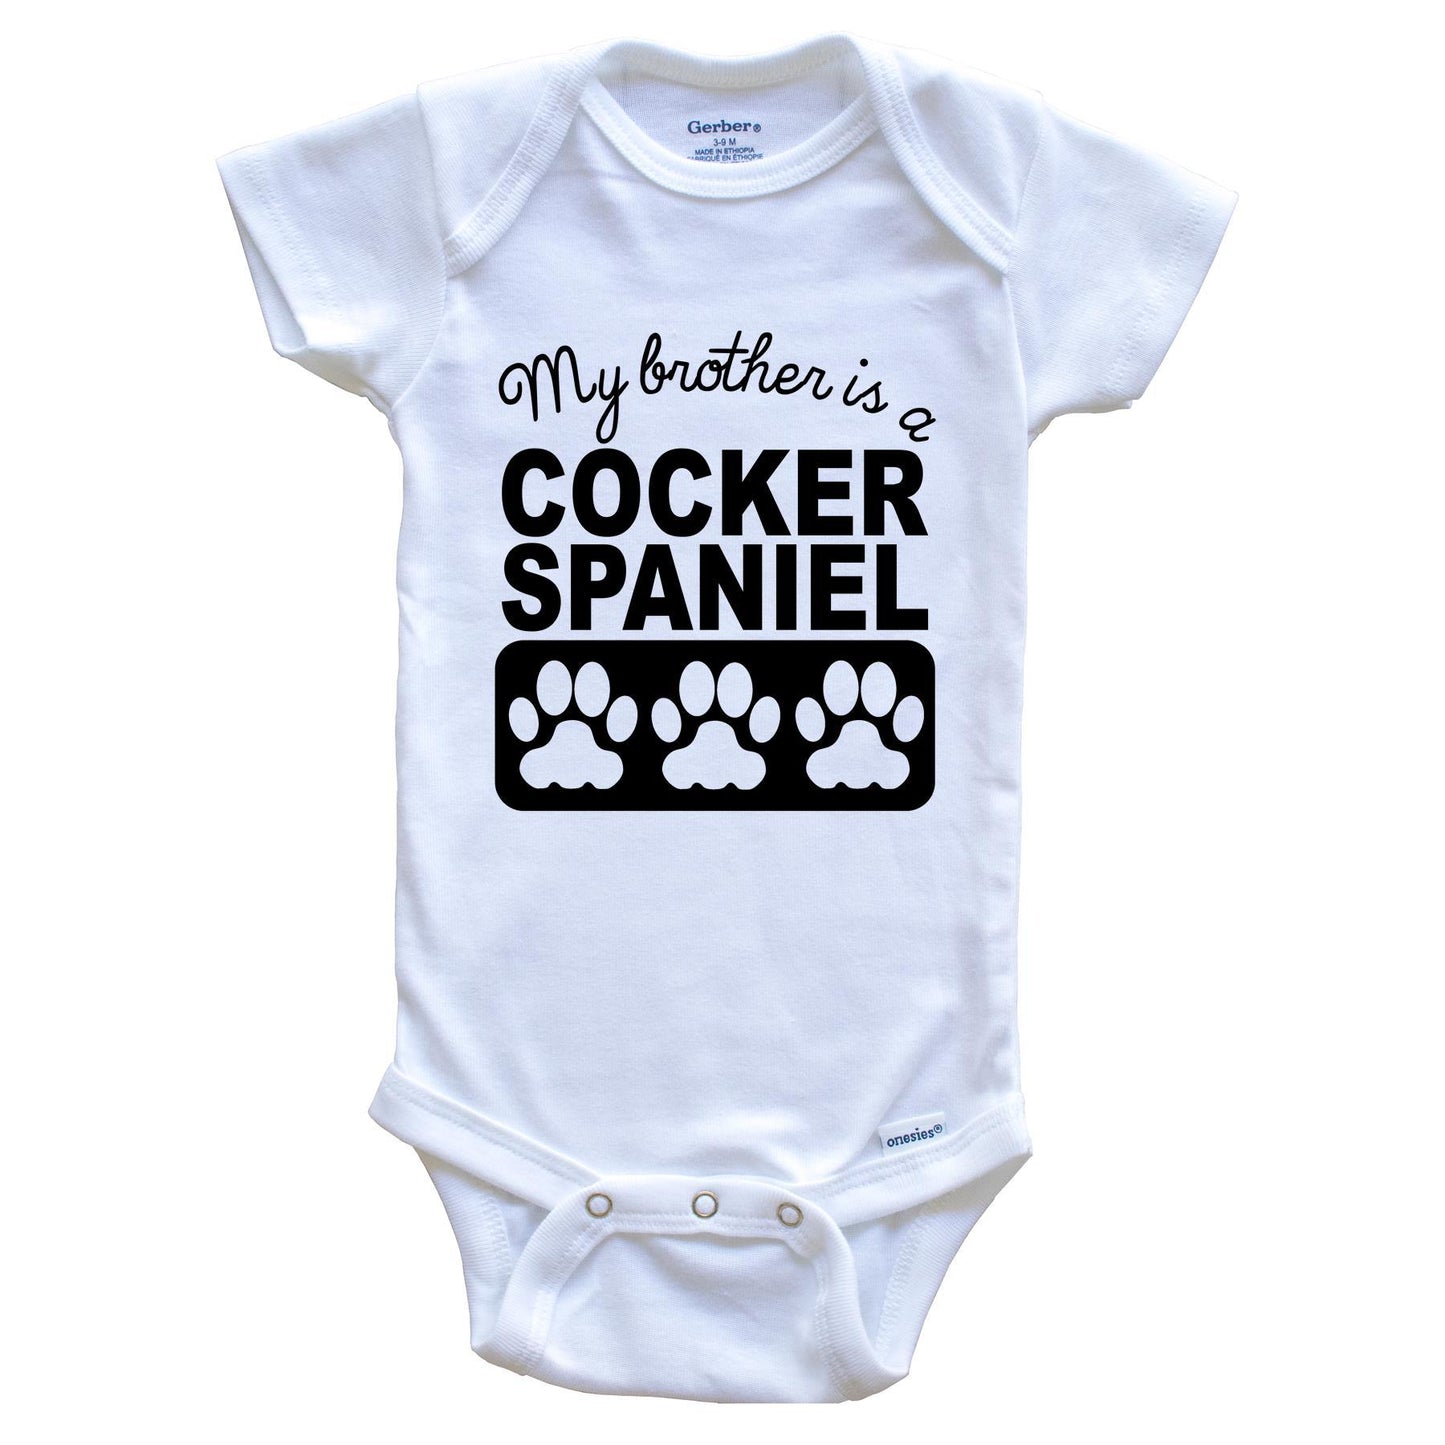 My Brother Is A Cocker Spaniel Baby Onesie